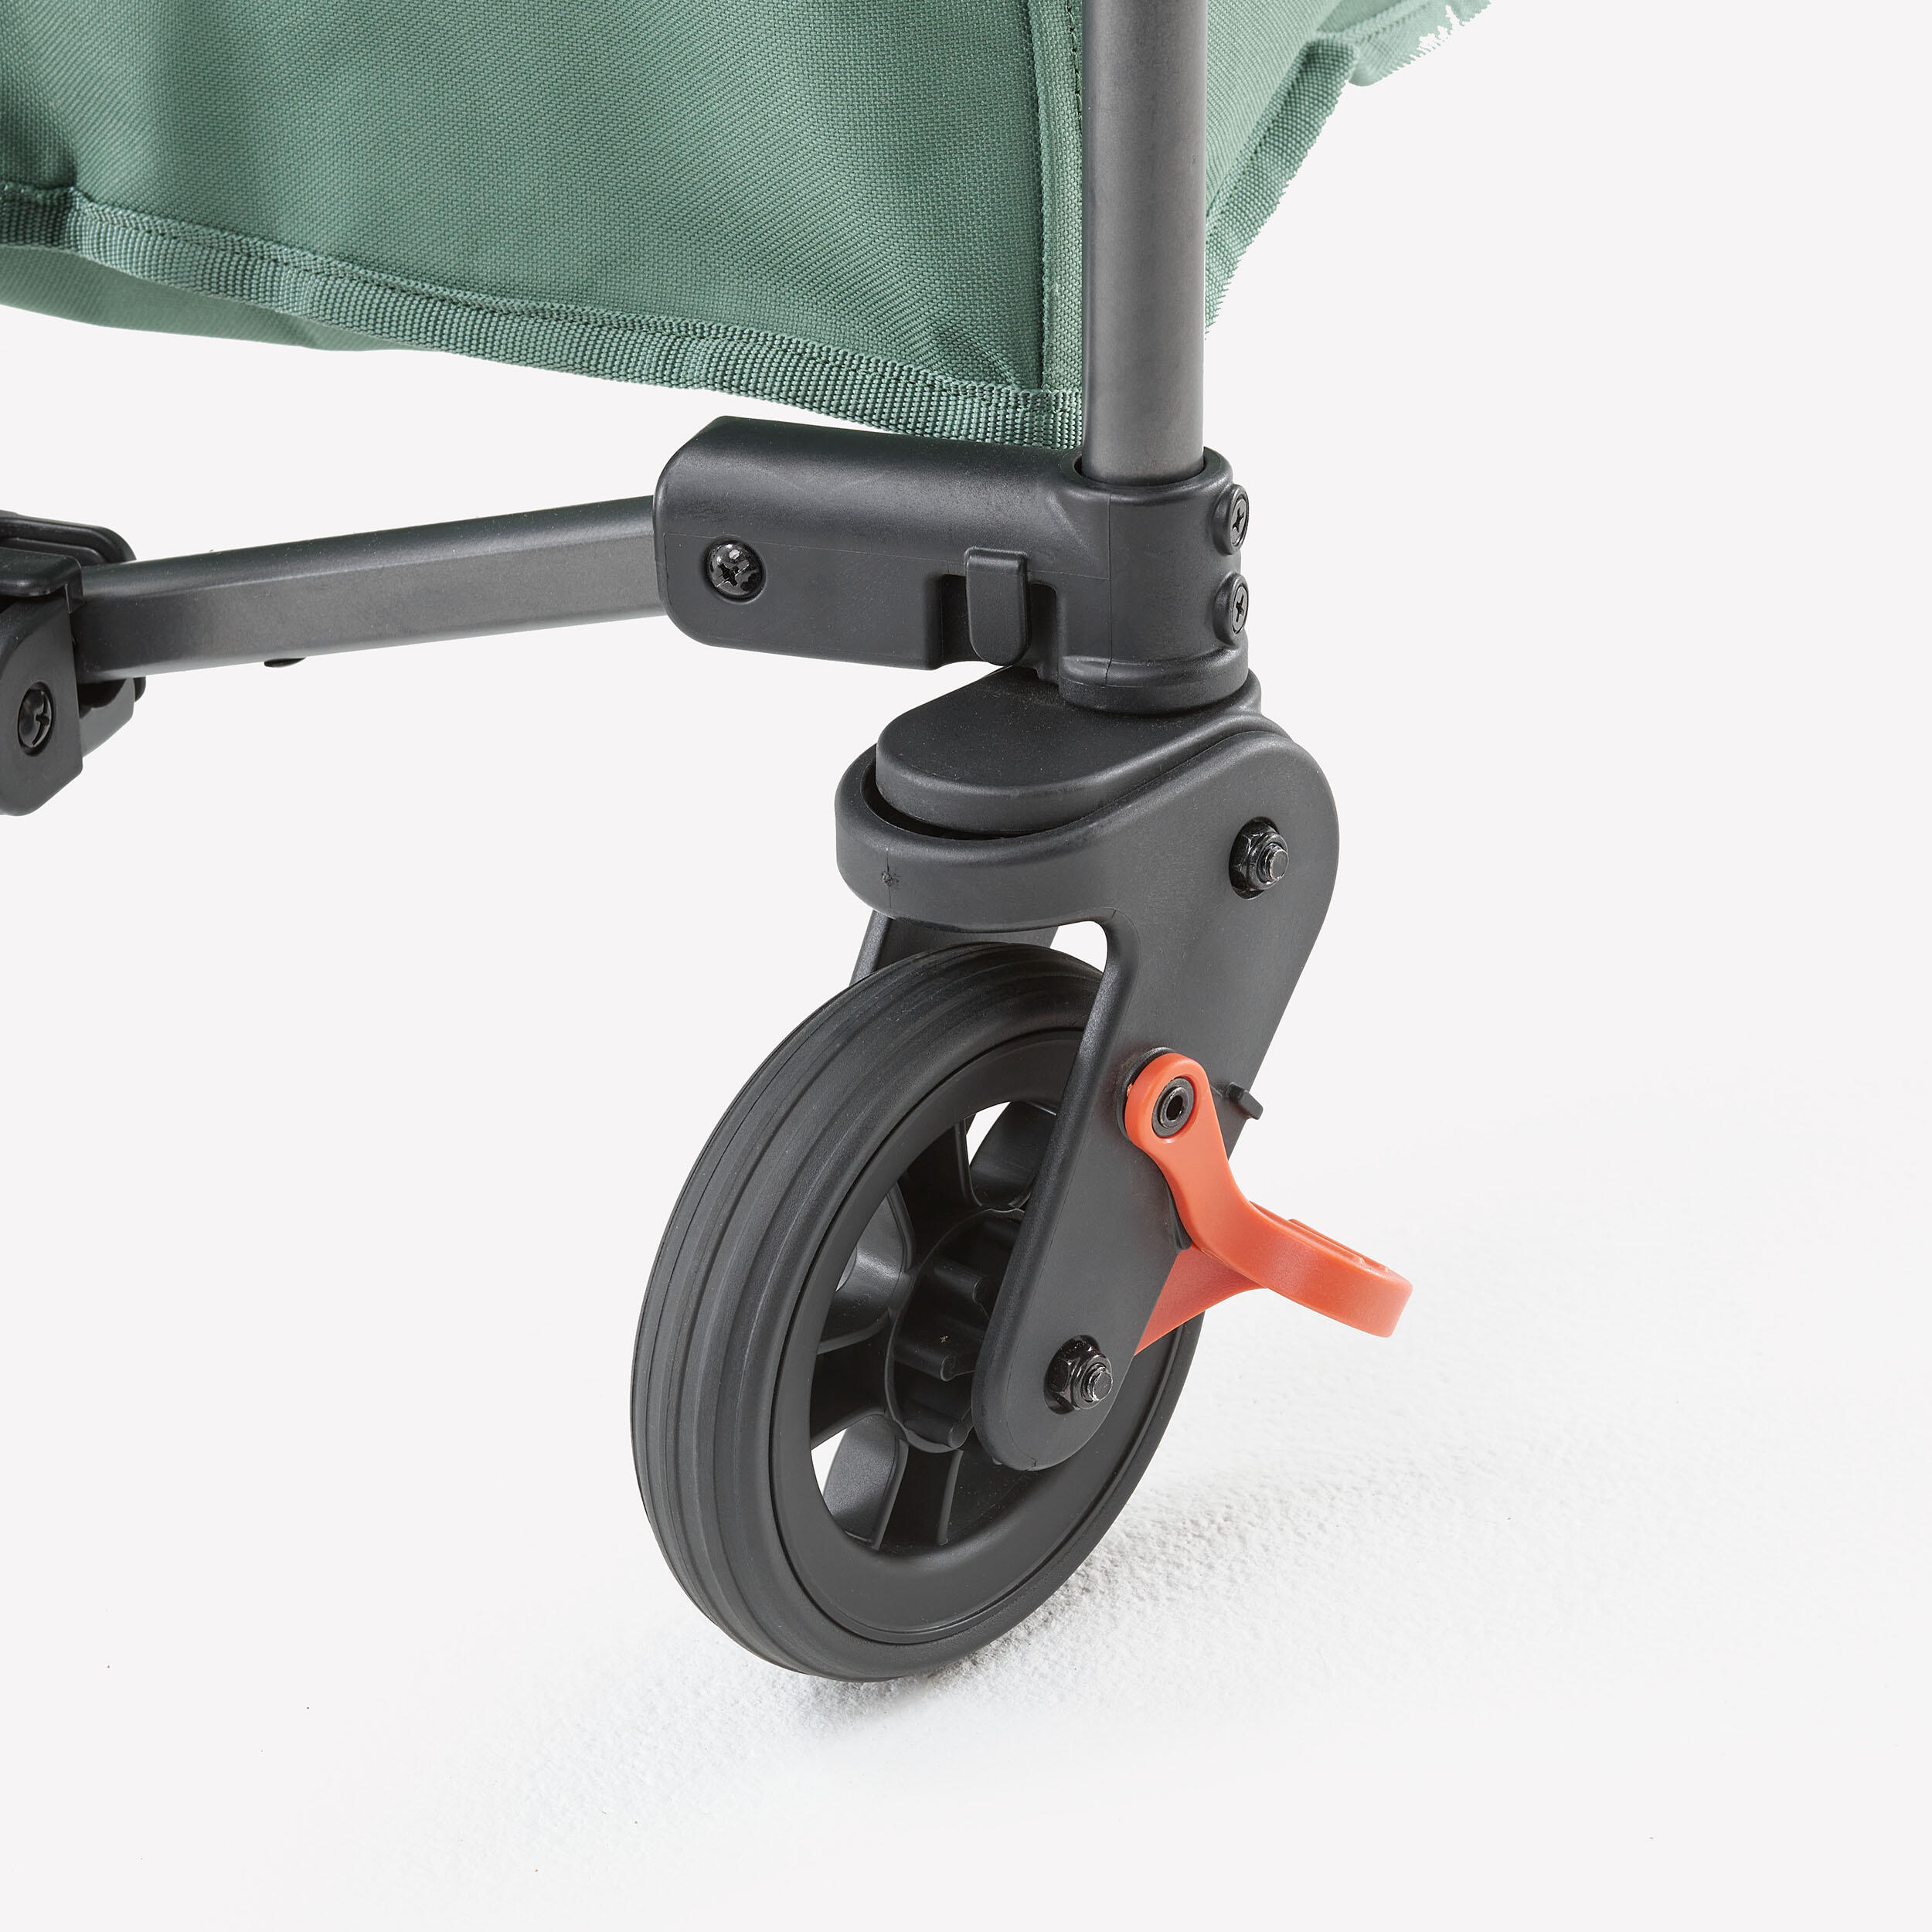 COMPACT TROLLEY FOR TRANSPORTING CAMPING EQUIPMENT - ULTRA-COMPACT TROLLEY 6/6